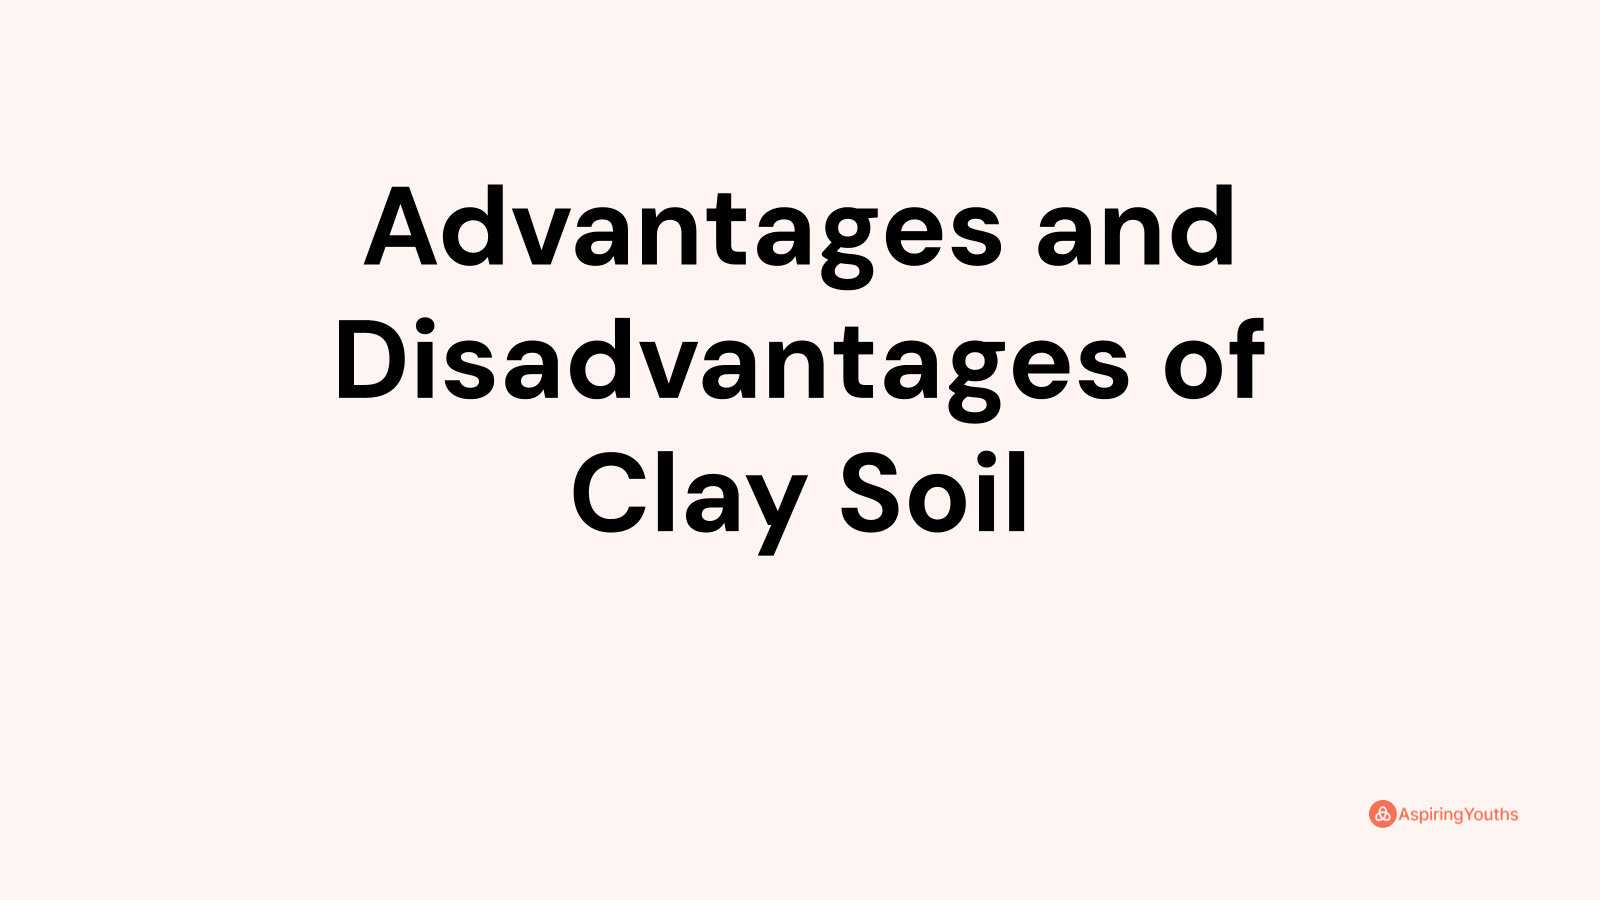 Advantages and Disadvantages of Clay Soil